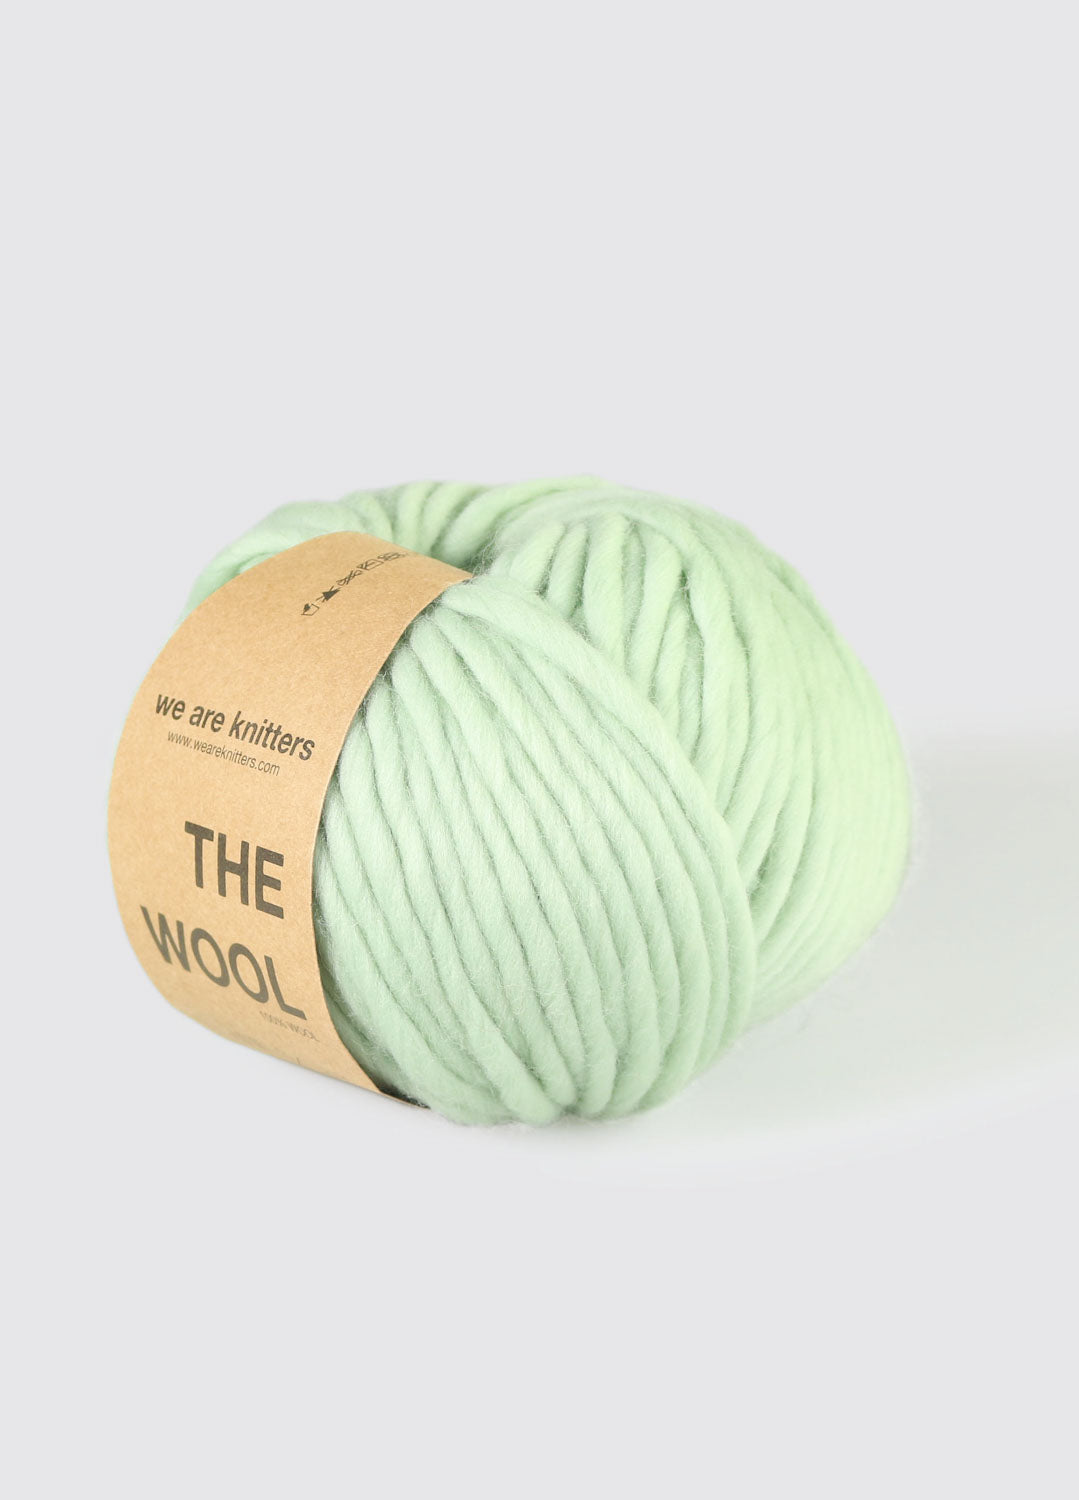 The Wool Sage green – We are knitters